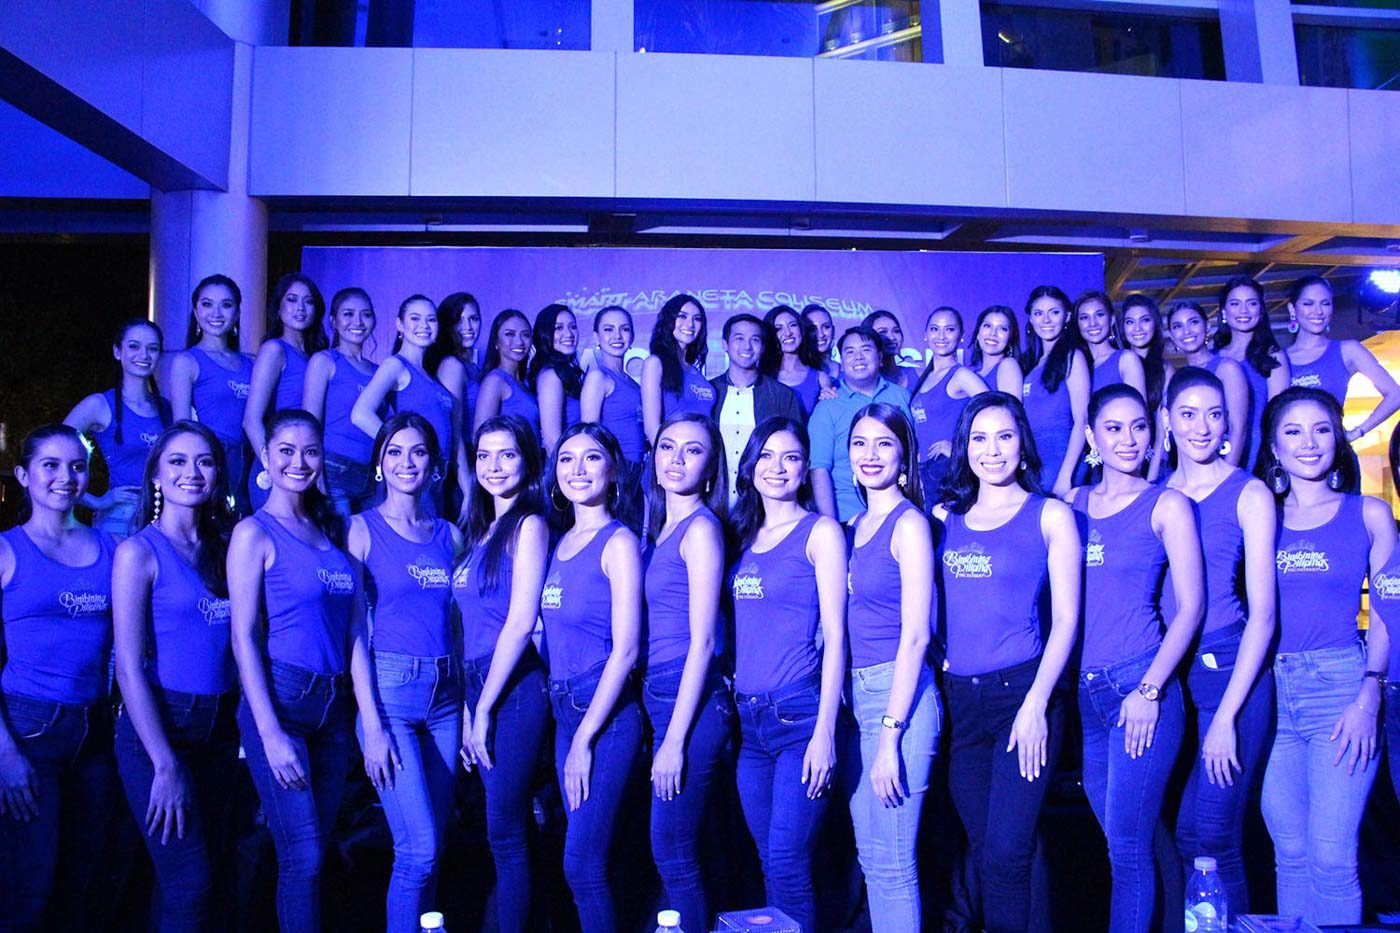 IN PHOTOS: Bb Pilipinas 2019 candidates join celebration of World Autism Day